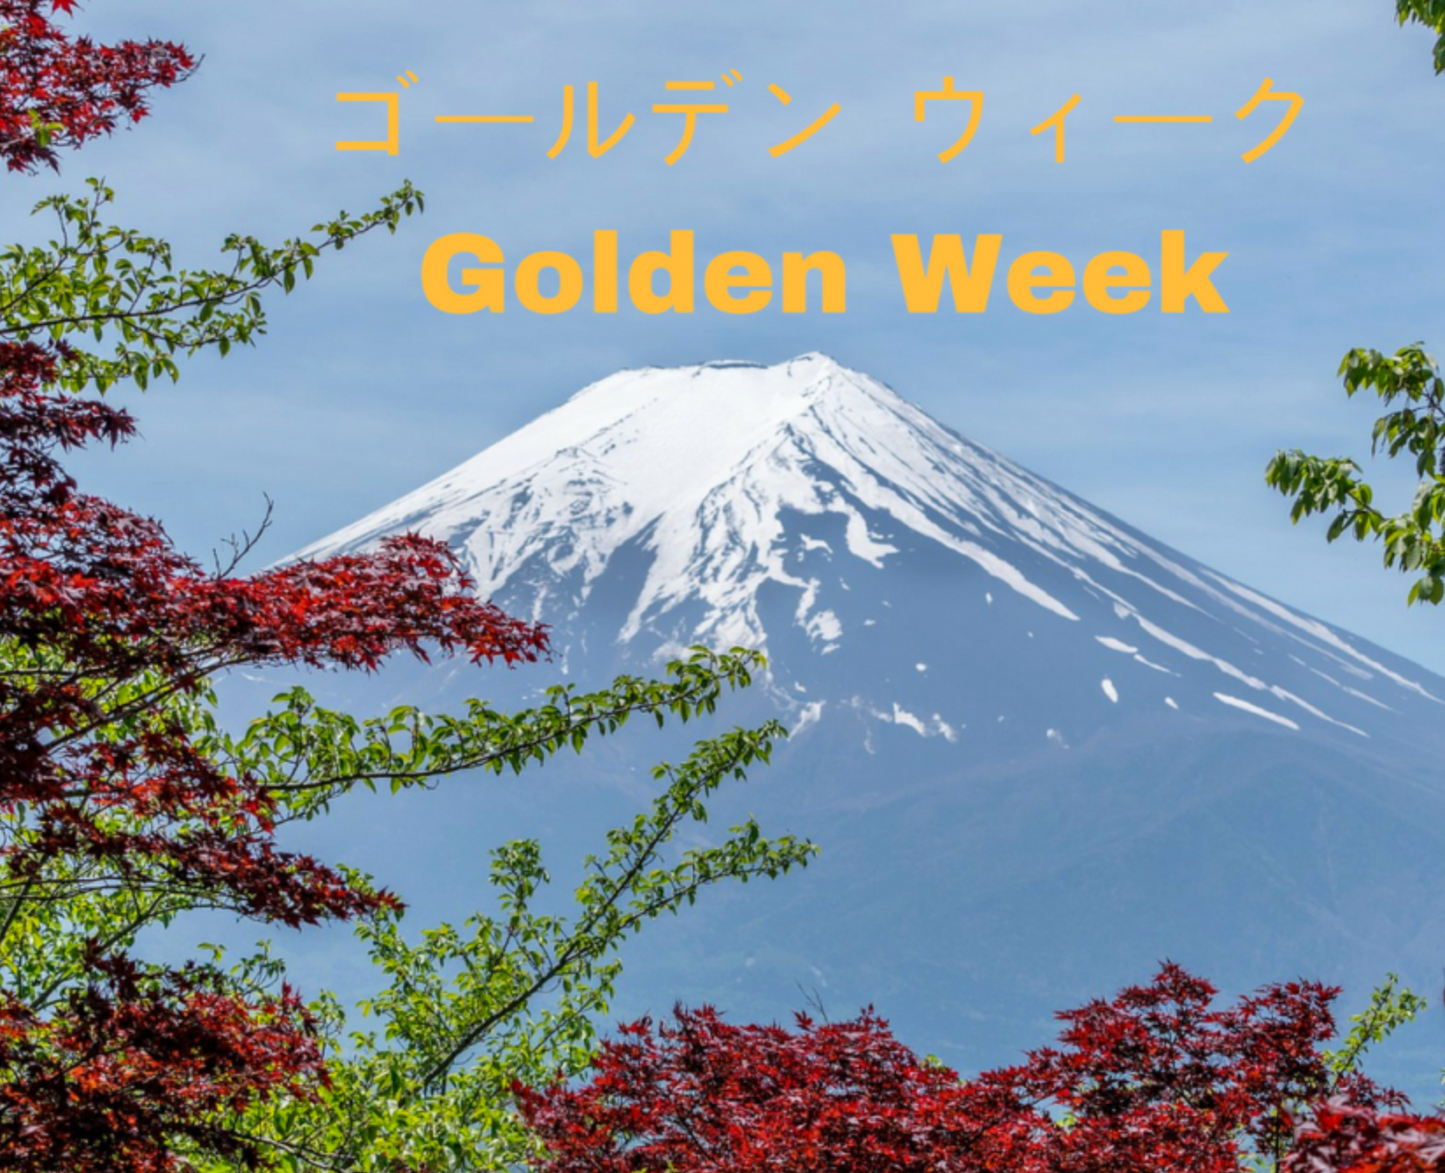 Notice of Business Hours during Golden Week National Holiday